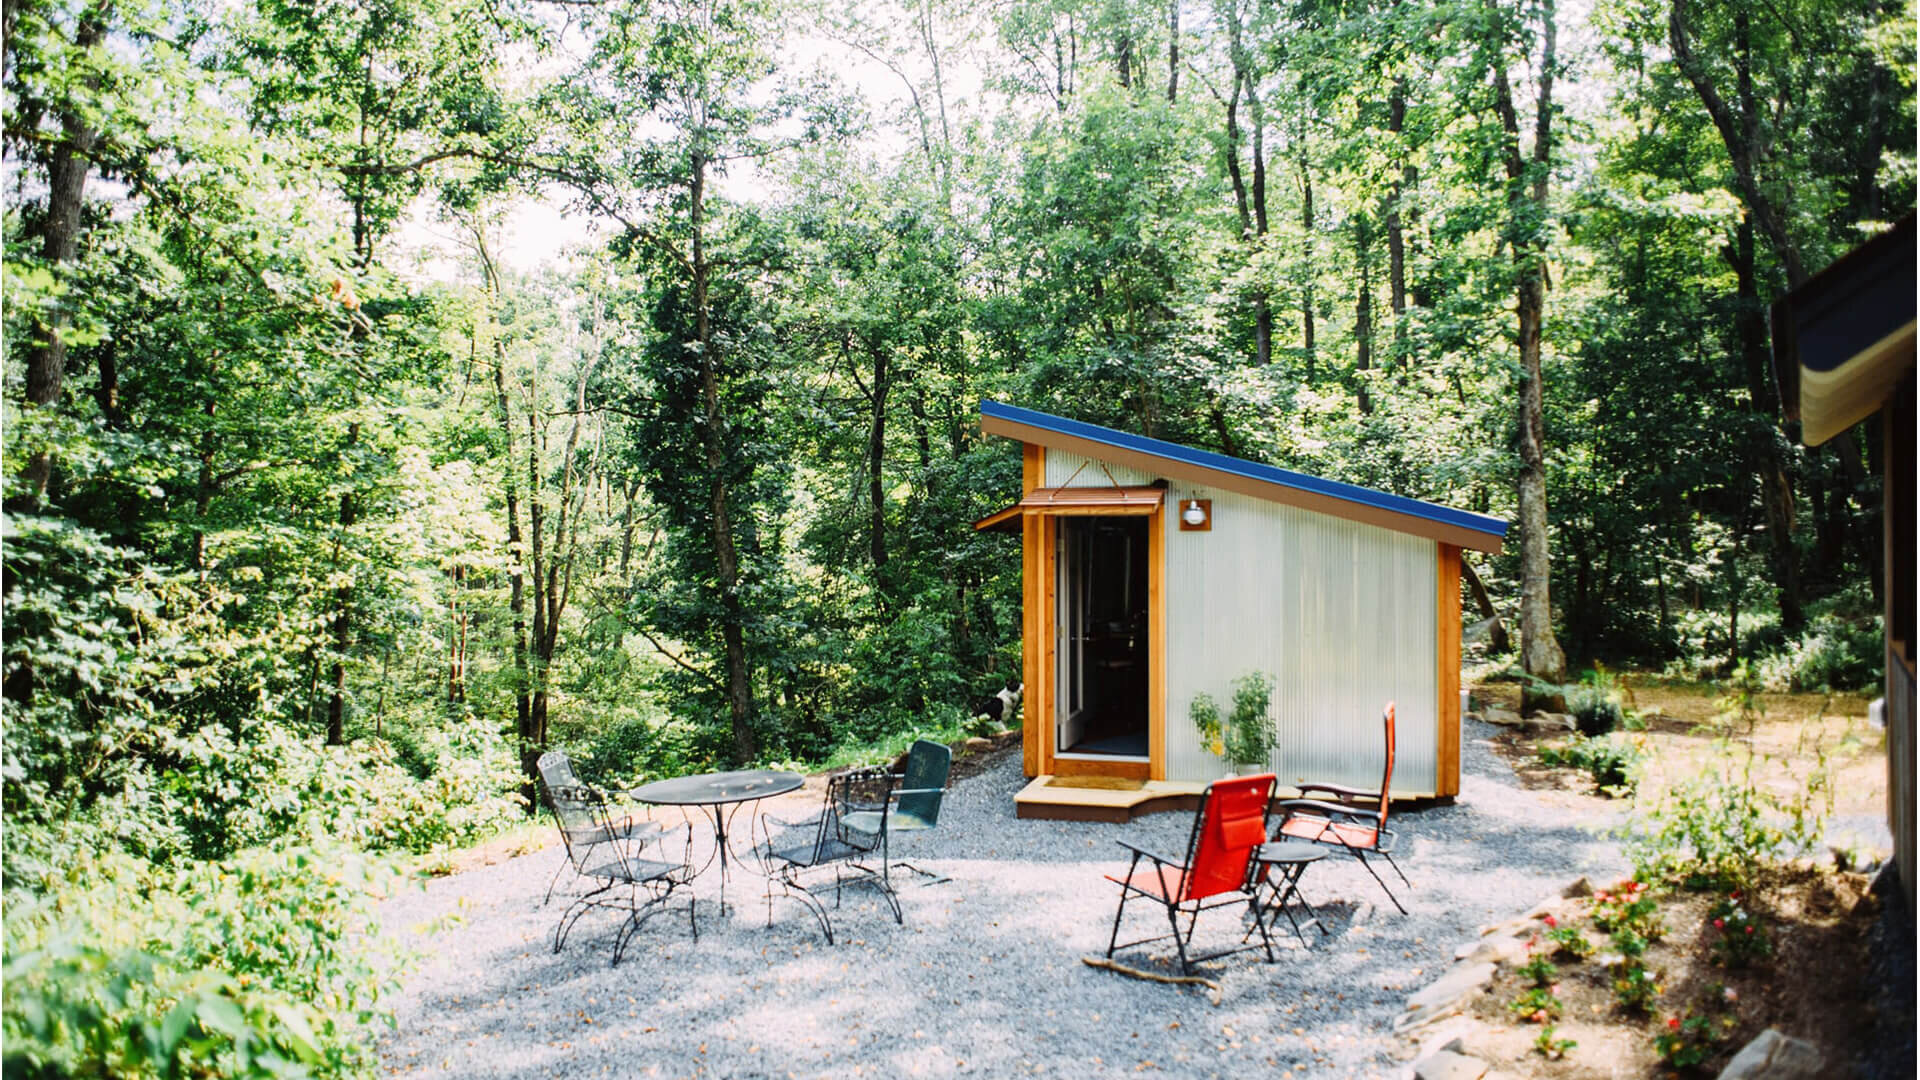  Molly is a tiny house that is available for rent through Airbnb near Oakland, Maryland.  